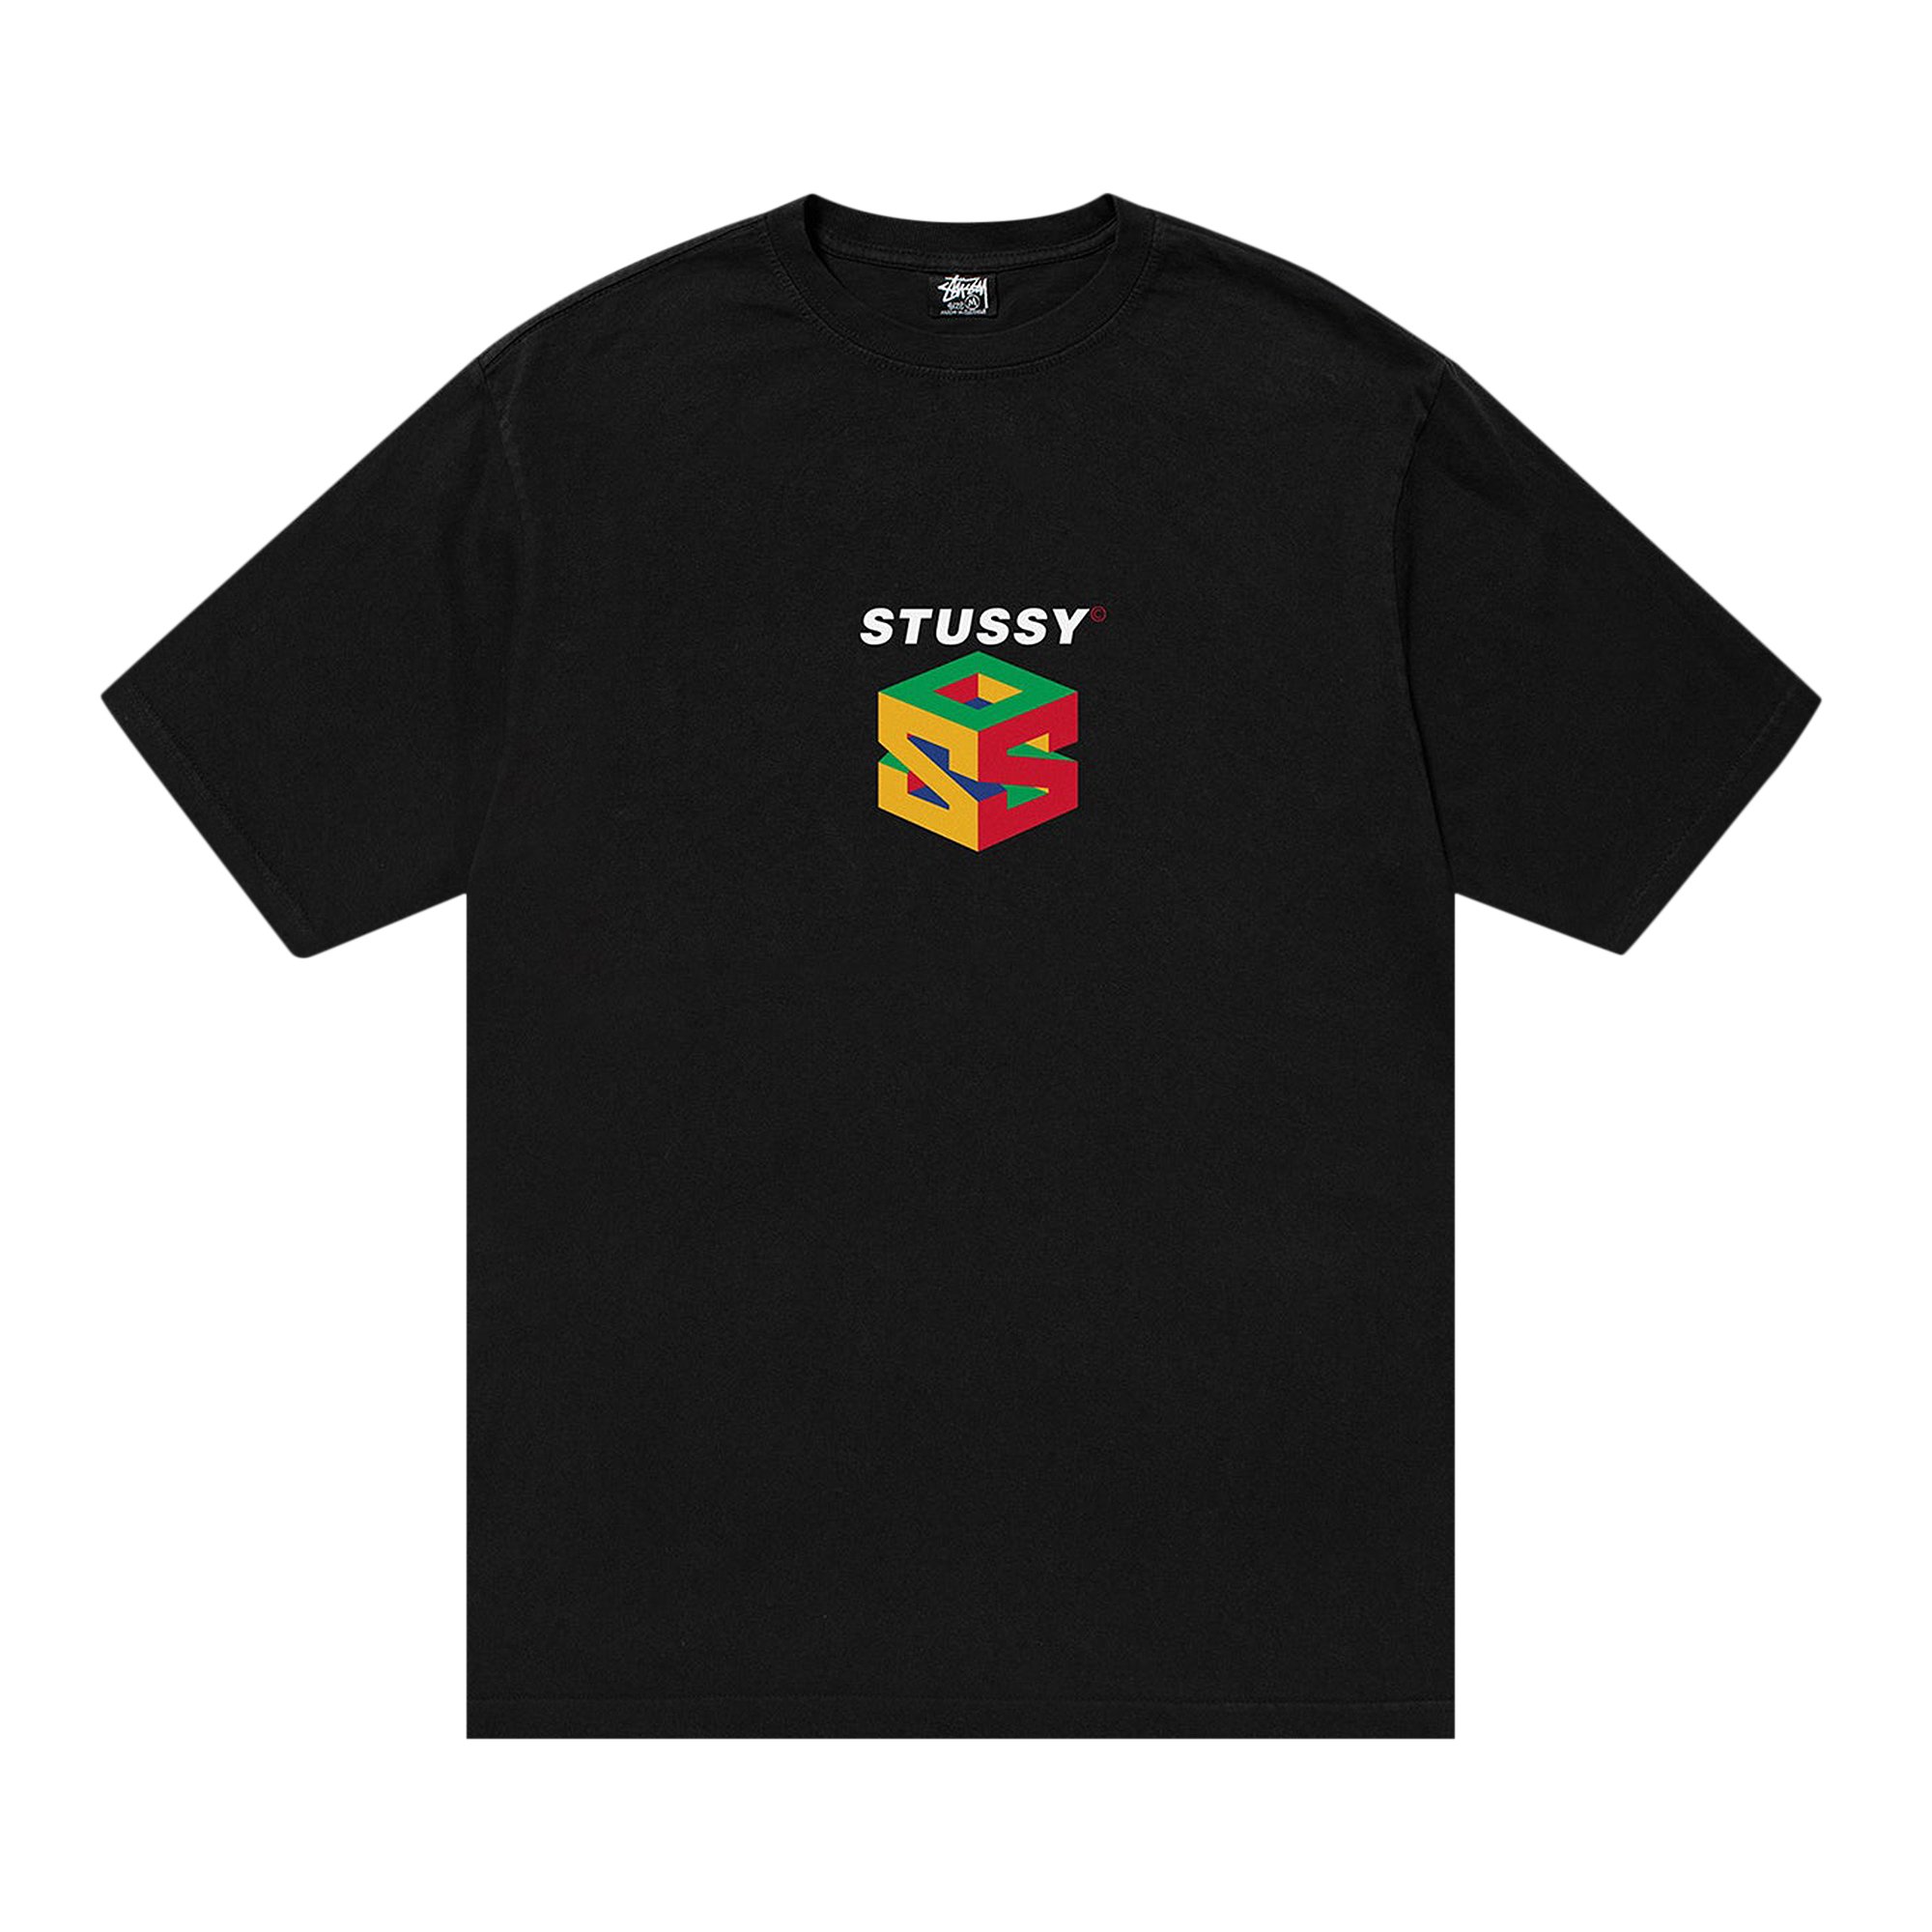 Buy Stussy S64 Pigment Dyed Tee 'Black' - 1904913 BLAC | GOAT